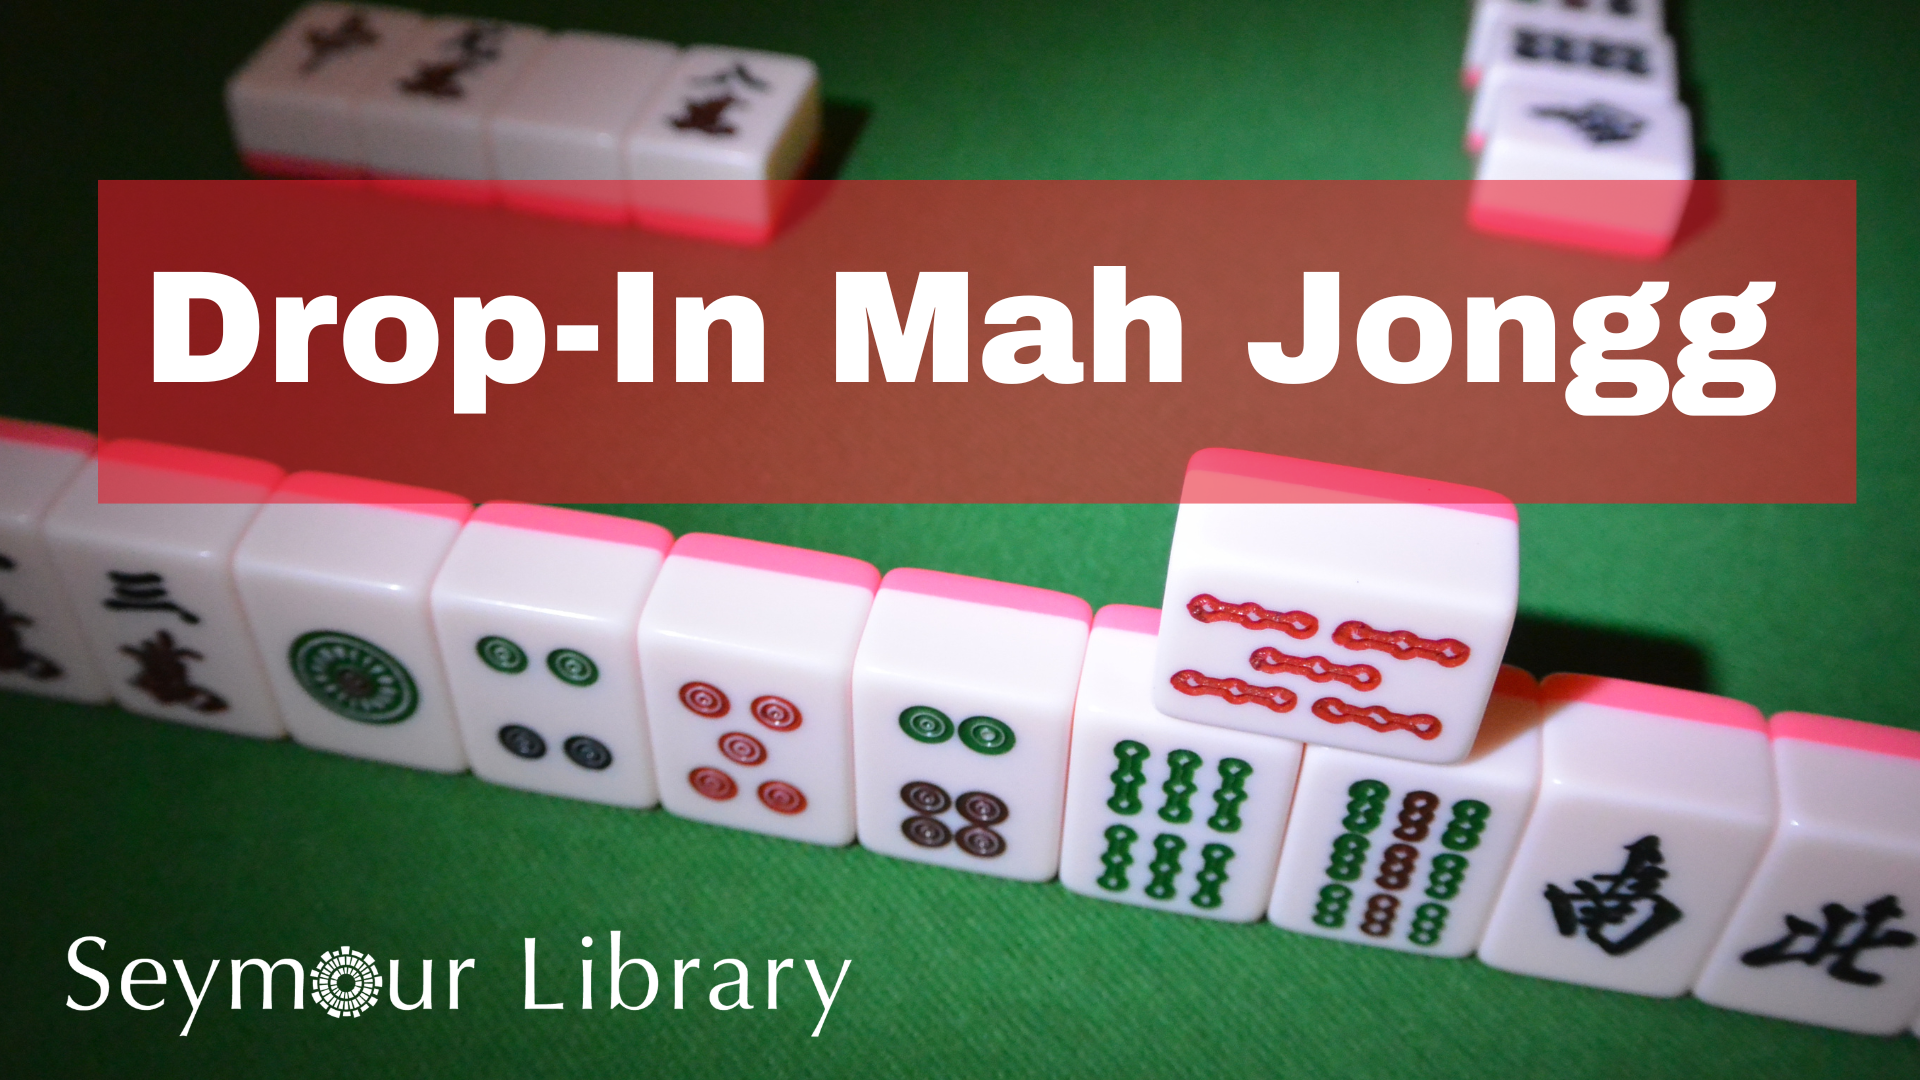 Drop-In Mah Jongg with picture of game and Seymour Library logo